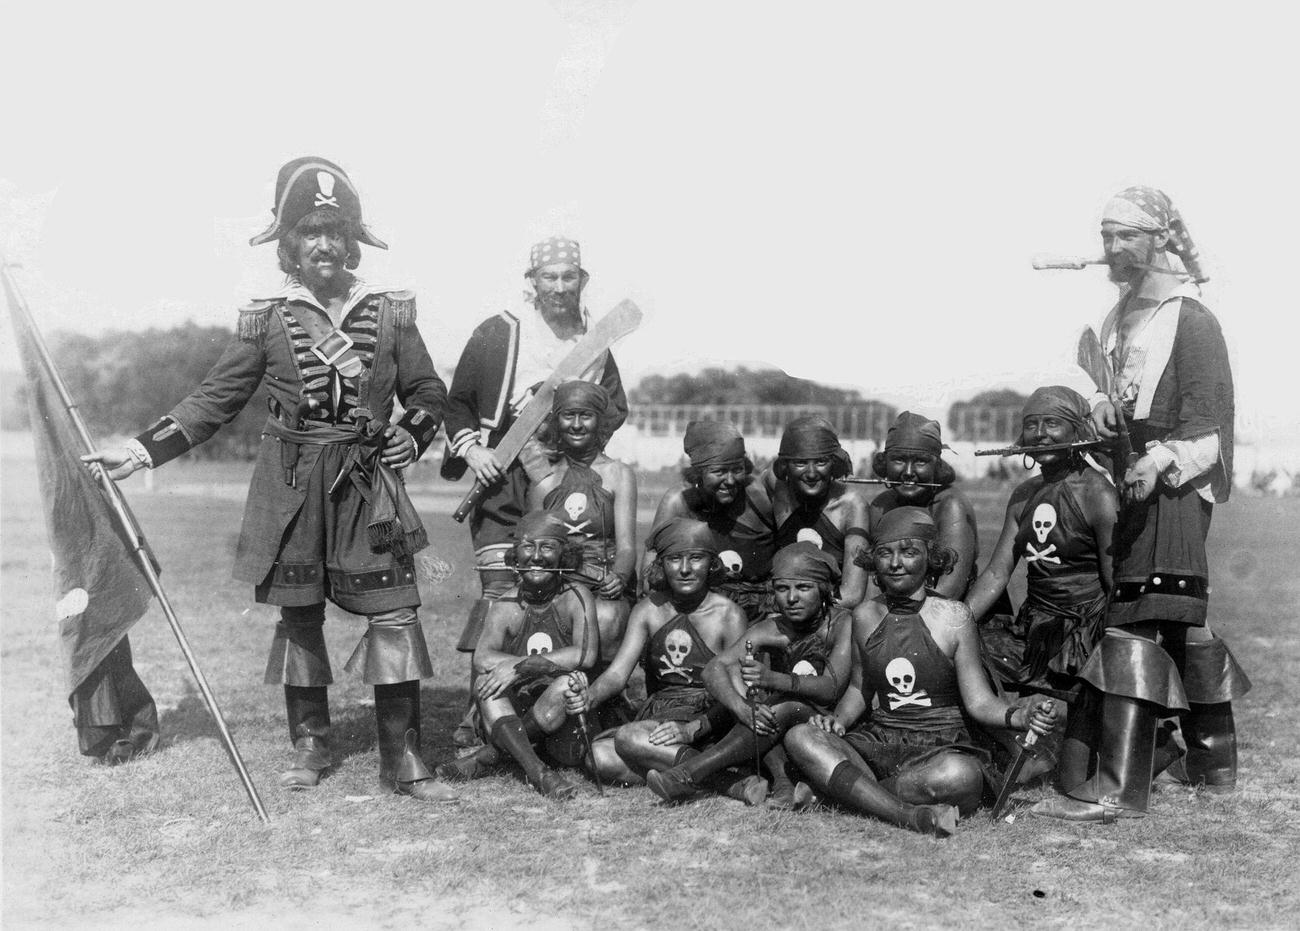 Another Group Of Young Pirates, 1900